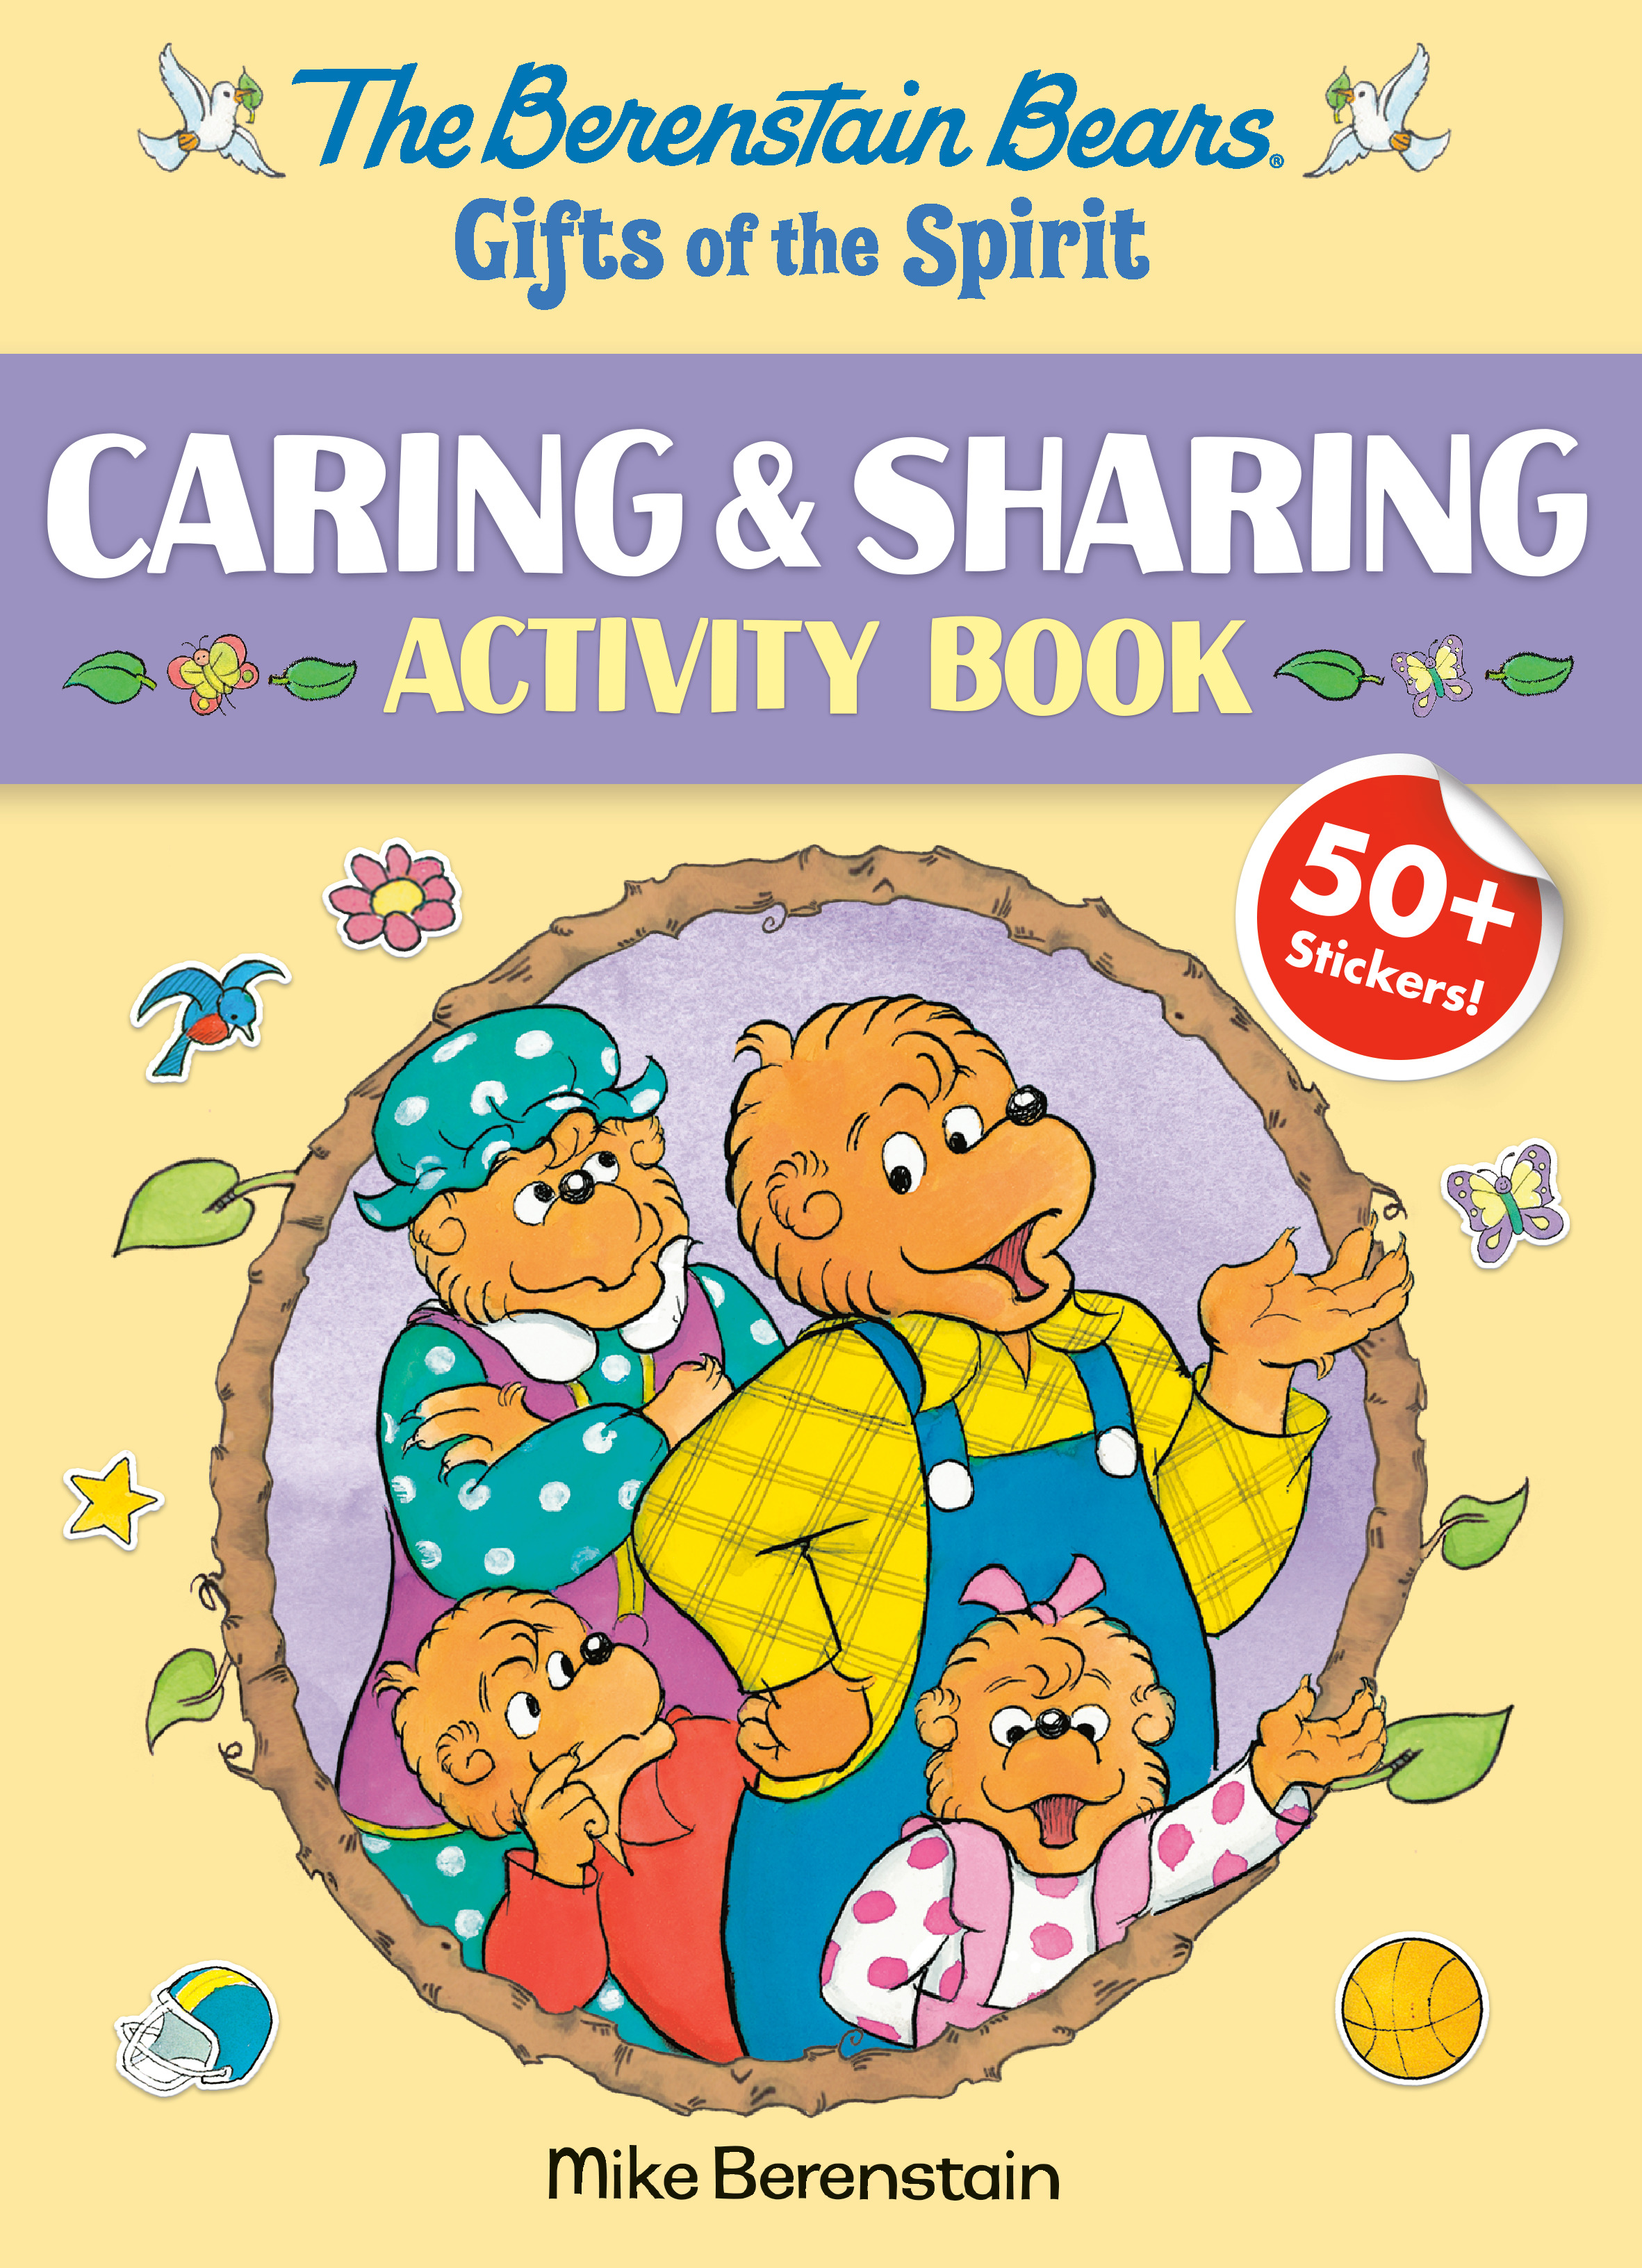 The Berenstain Bears Gifts of the Spirit Caring &amp; Sharing Activity Book (Berenstain Bears) | Activity book